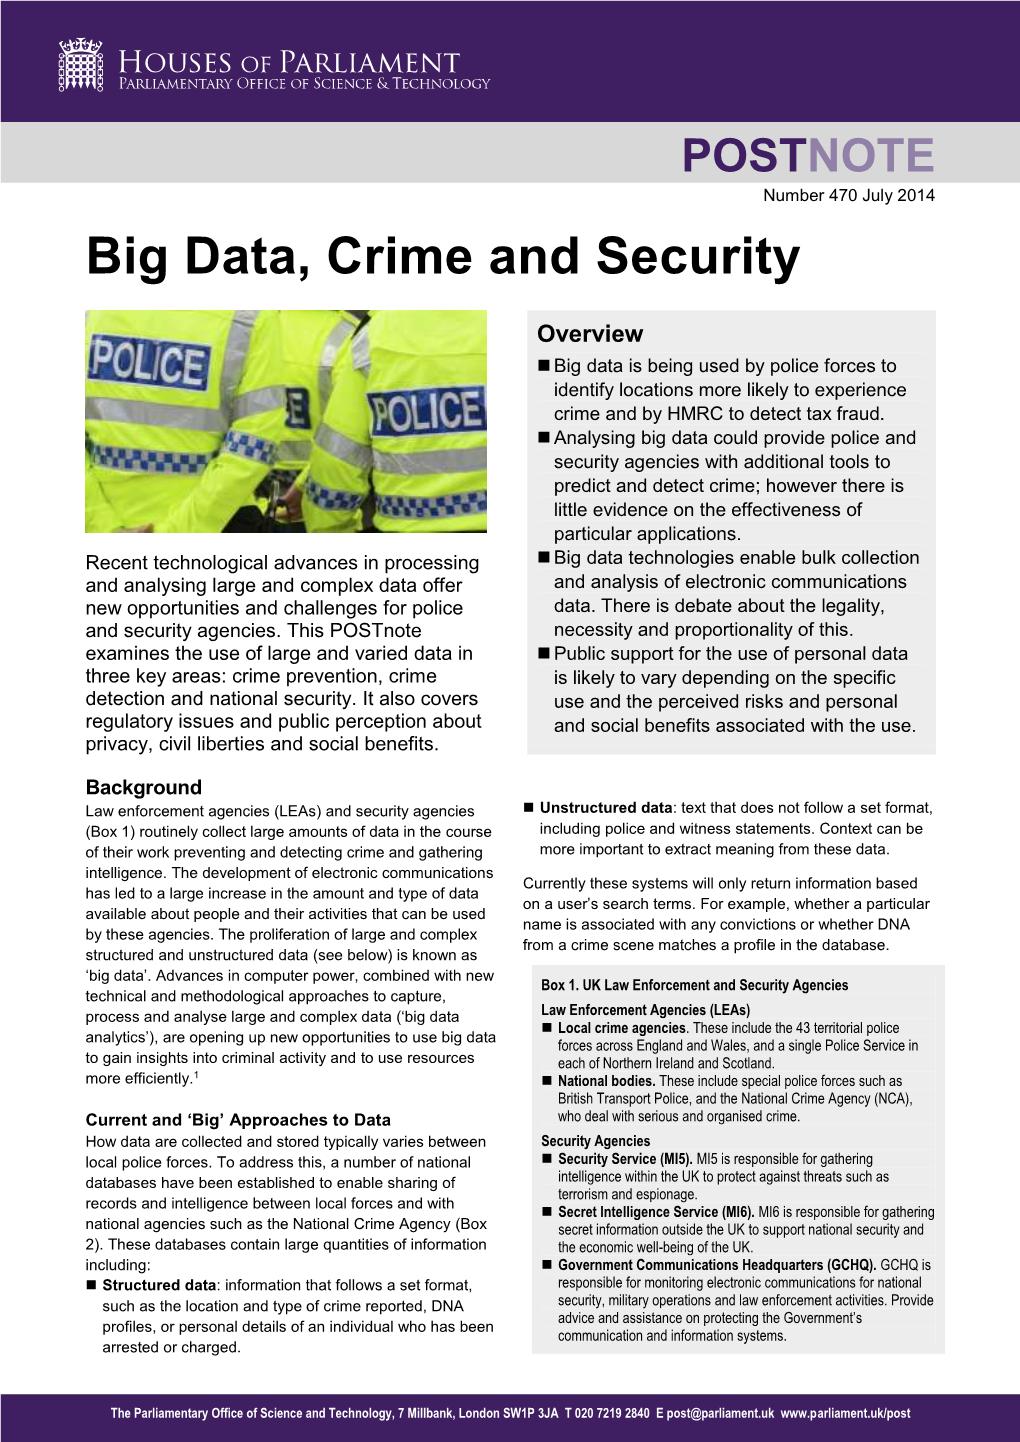 Big Data, Crime and Security